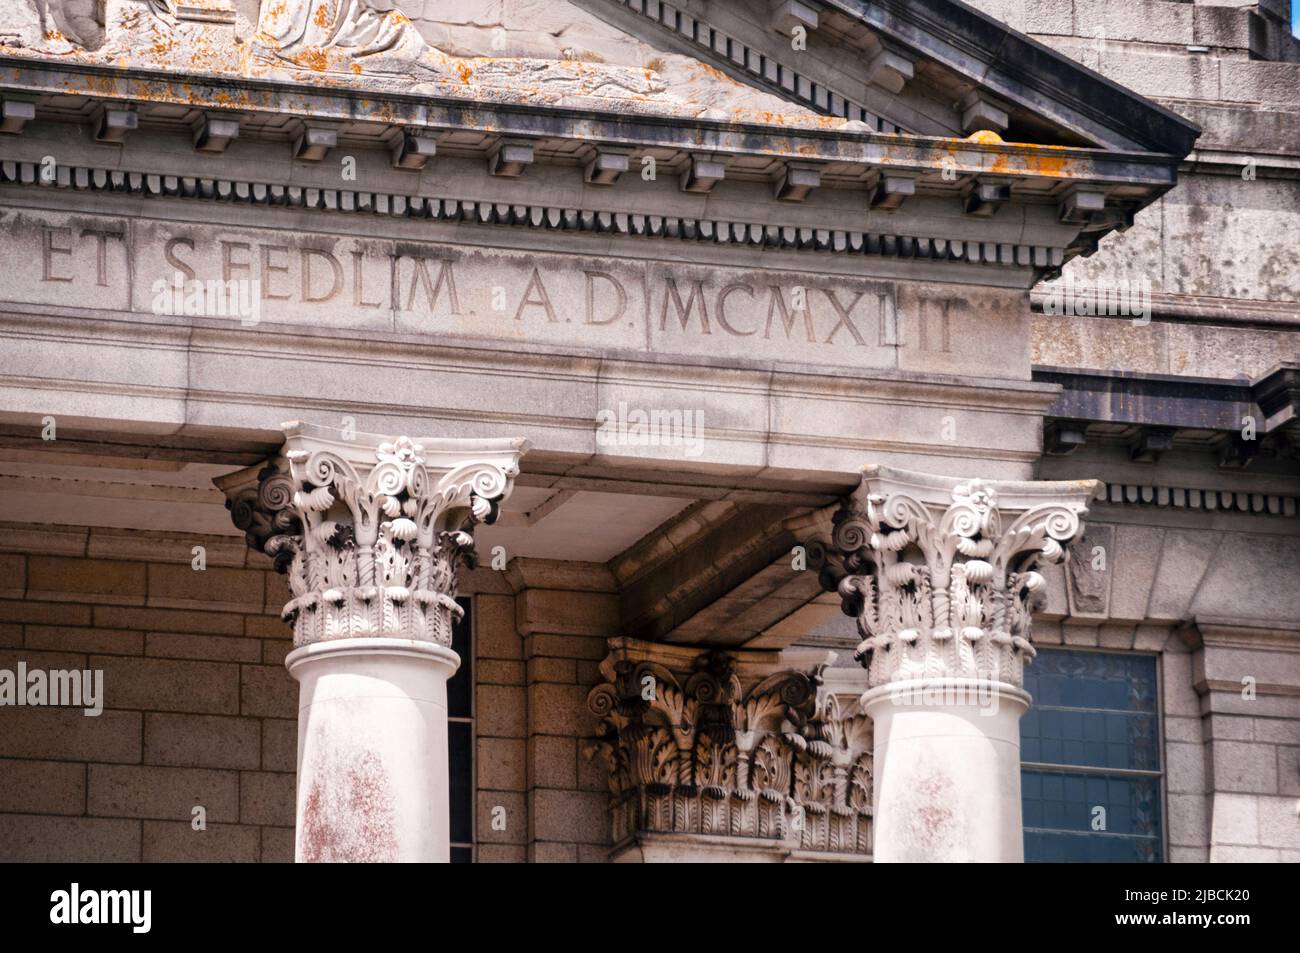 Lettered frieze and Corinthian capitals at thel Neo-Classical Cathedral of Saints Patrick and Felim in Cavan, Ireland. Stock Photo